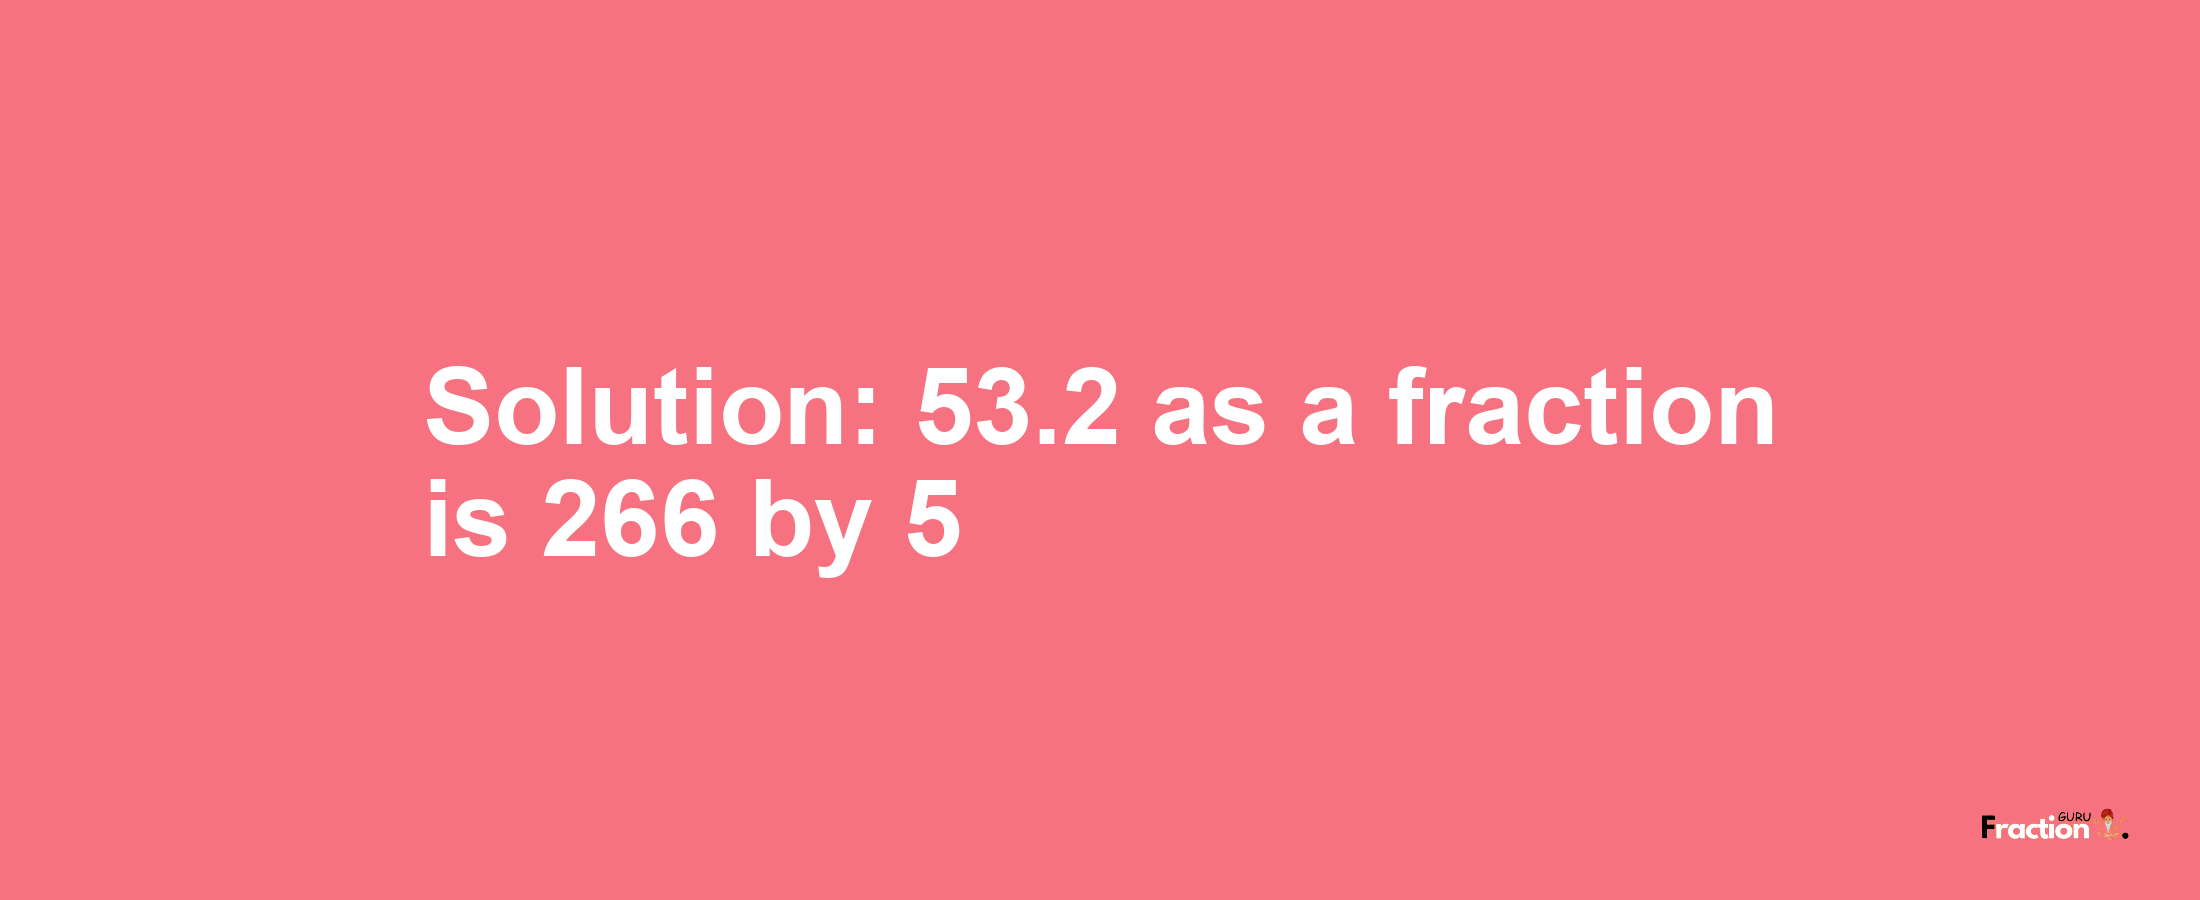 Solution:53.2 as a fraction is 266/5